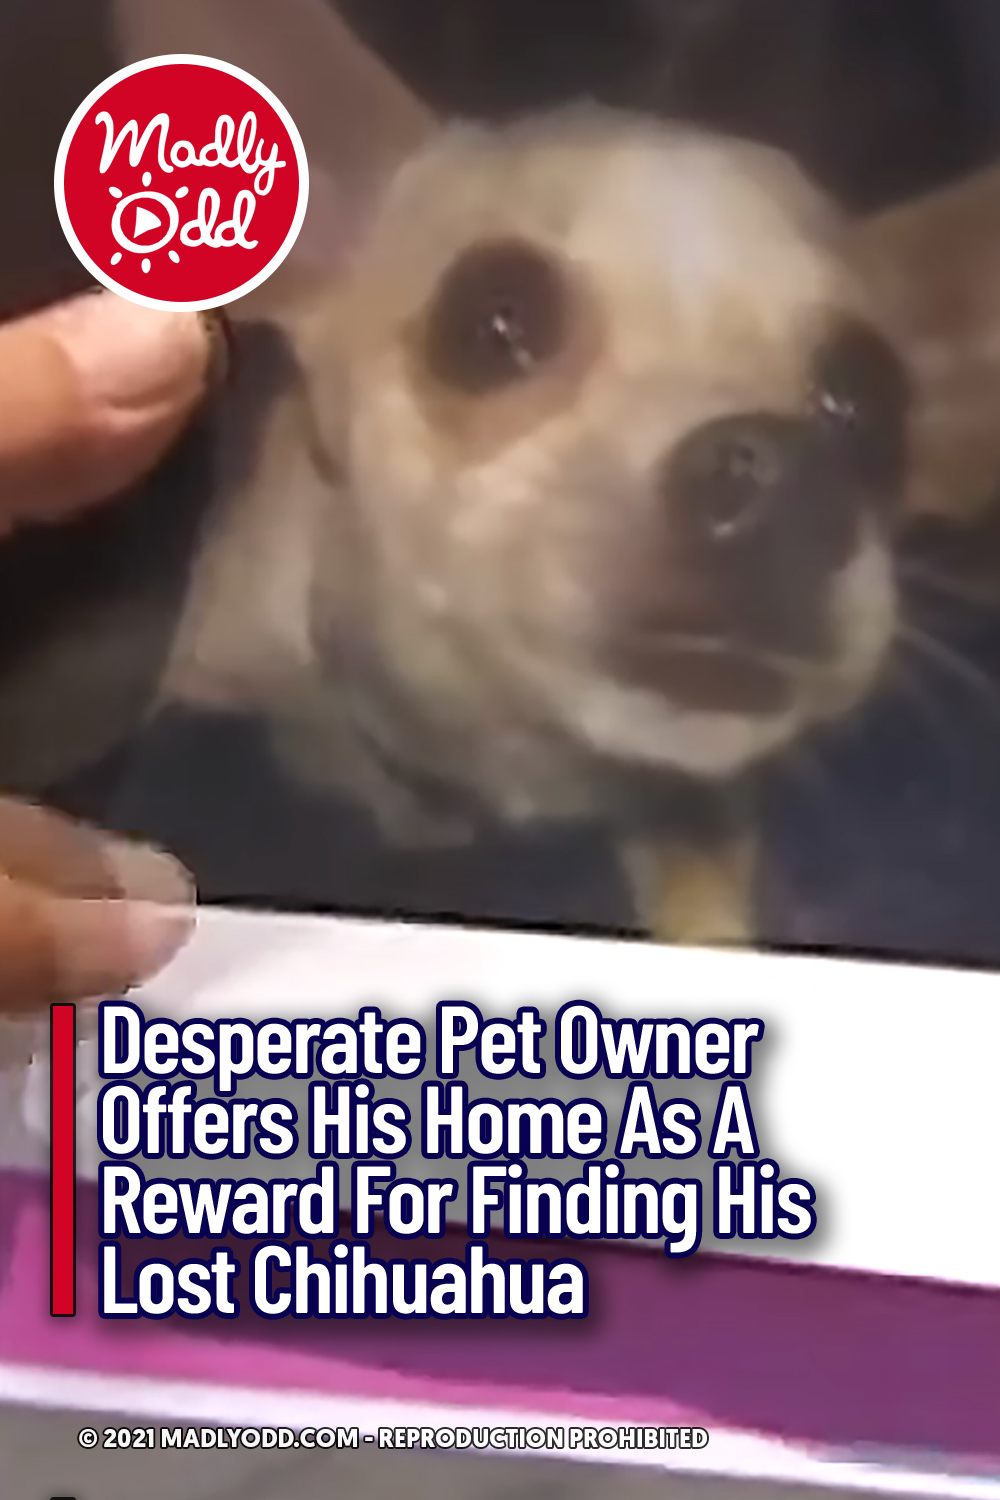 Desperate Pet Owner Offers His Home As A Reward For Finding His Lost Chihuahua